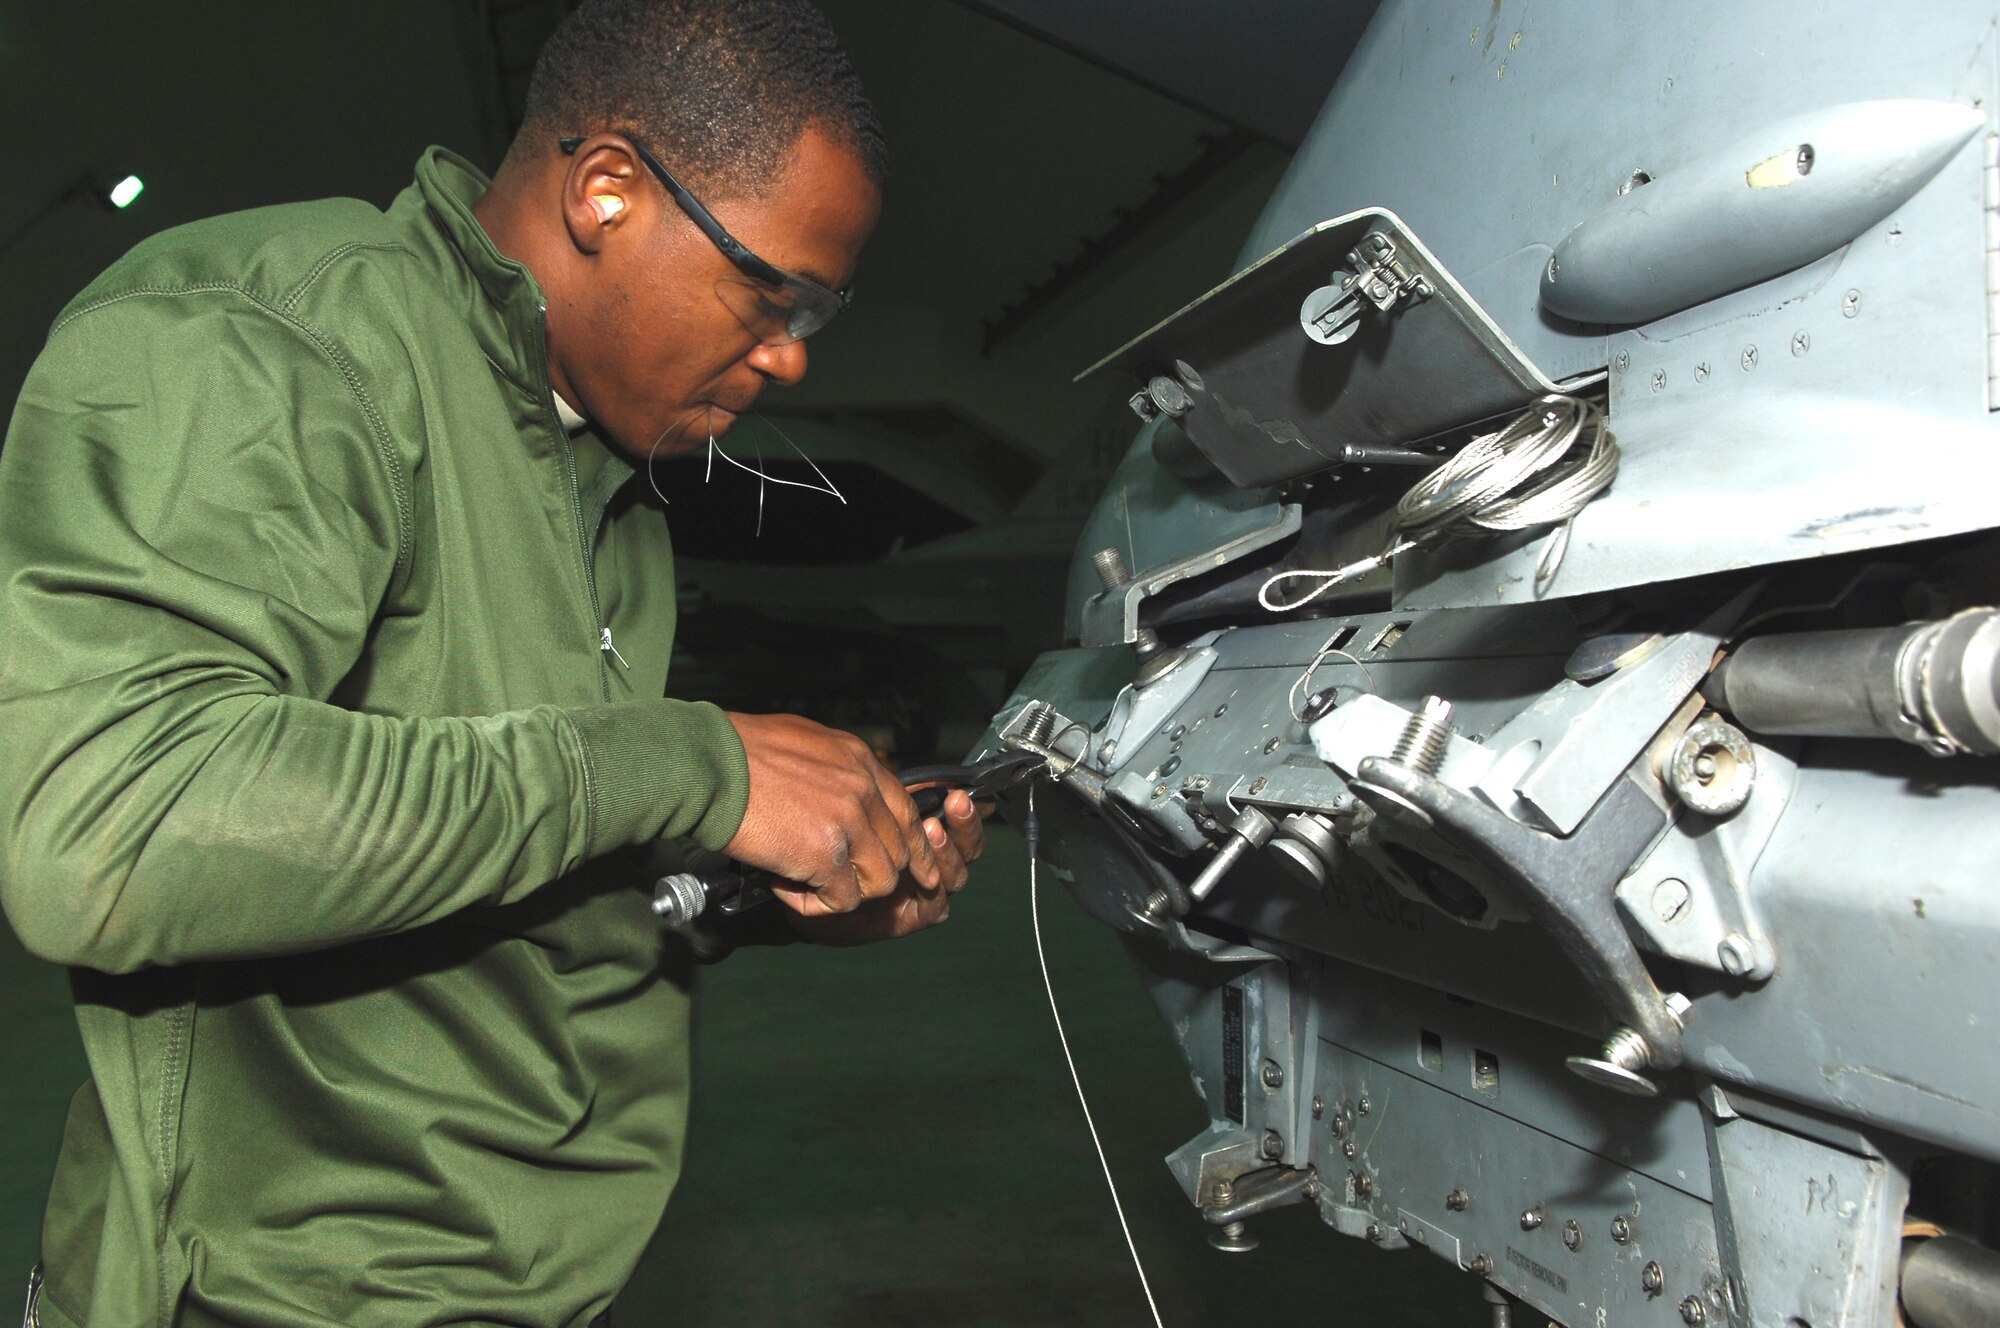 BALAD AIR BASE, Iraq -- Airman 1st Class Ray Williams, 332nd Expeditionary Aircraft Maintenance Squadron Viper Aircraft Maintenance Unit armament systems specialist, prepares alternate mission equipment for bombs to be loaded here, March 13. AME is the way munitions are attached to an aircraft. Airman Williams is deployed from Hill Air Force Base, Utah. (U.S. Air Force photo/ Staff Sgt. Mareshah Haynes)